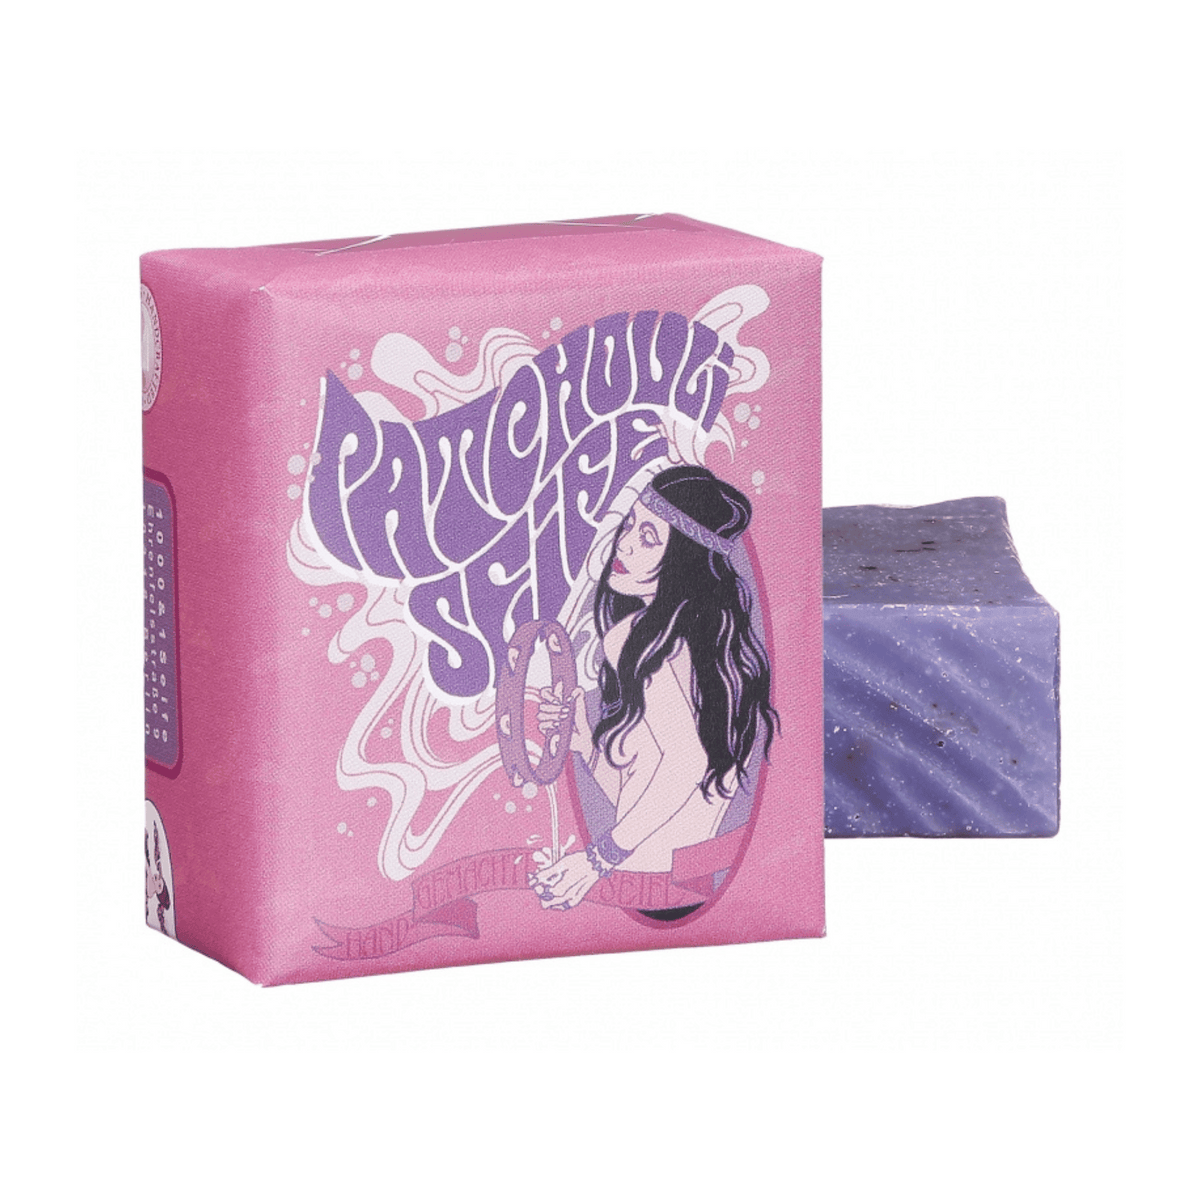 Primary Image of Patchouli Bar Soap